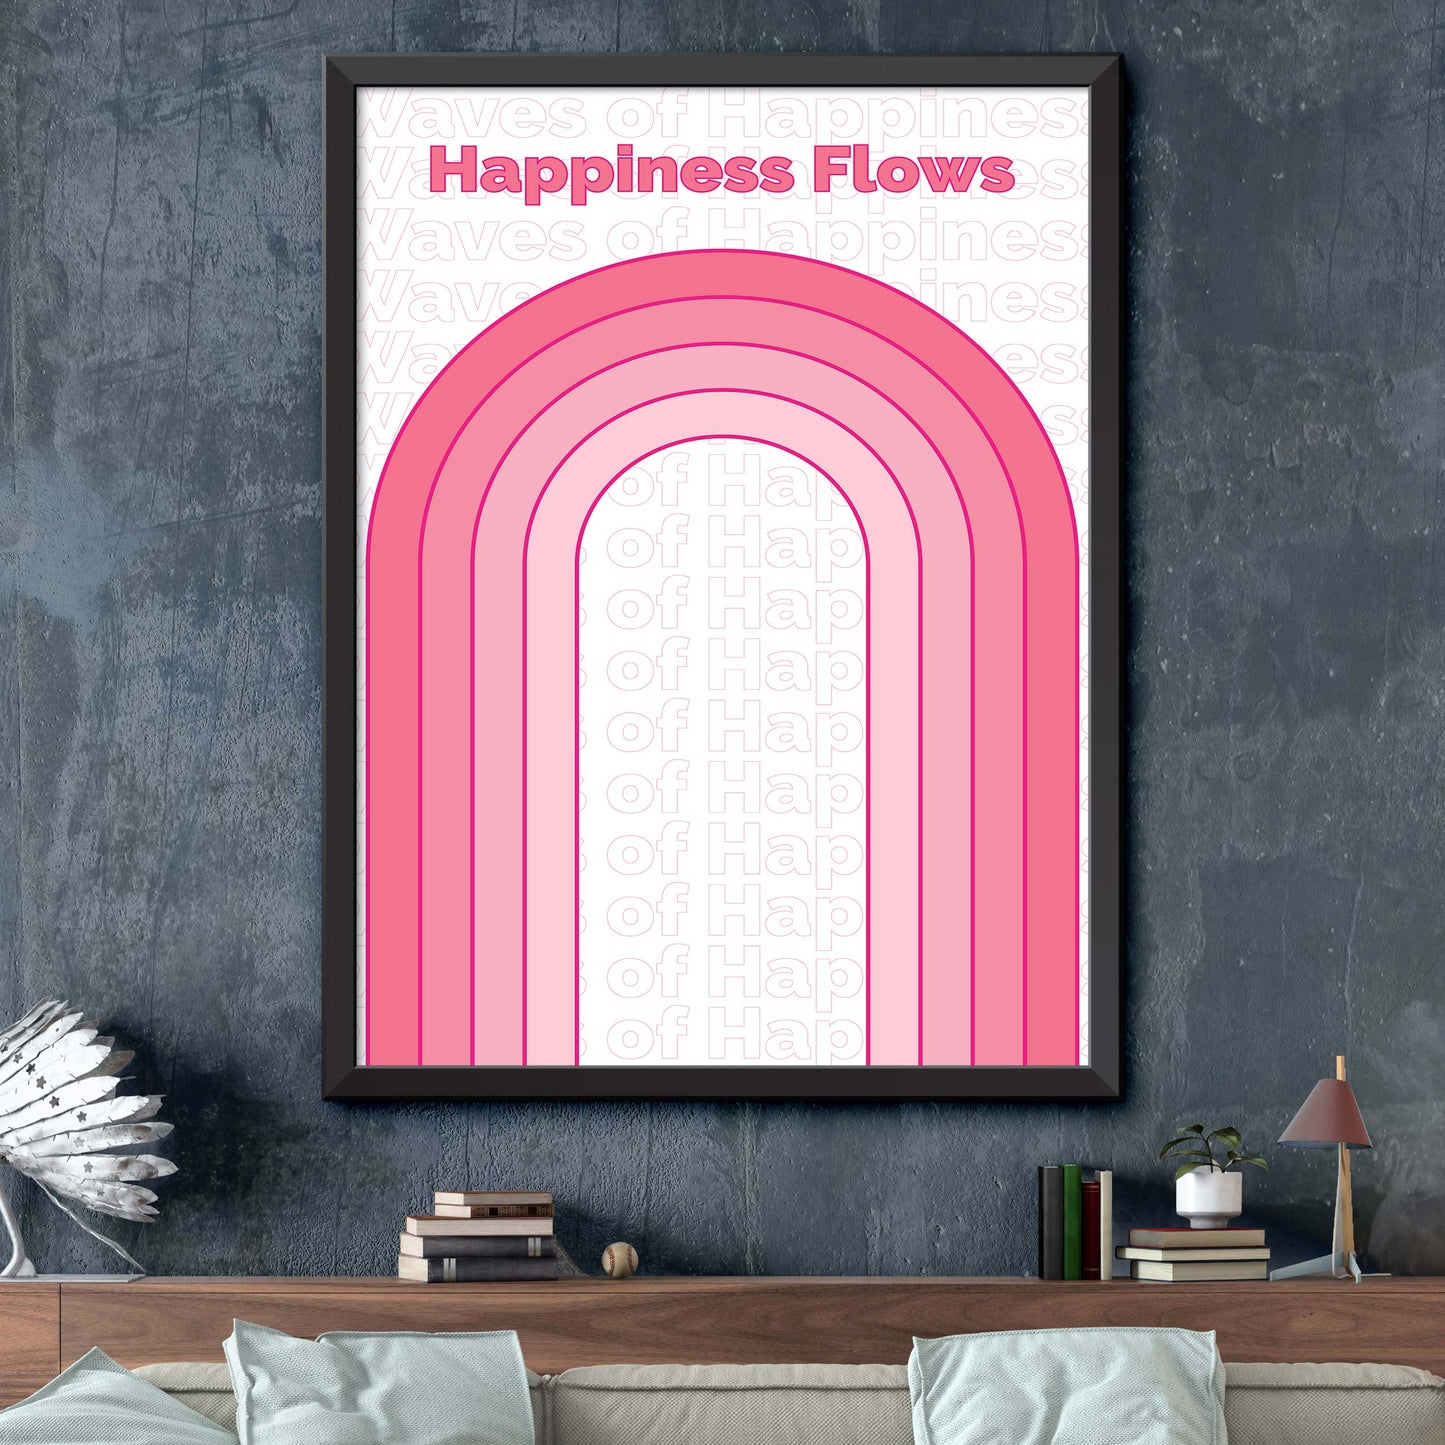 Happiness Flows Poster